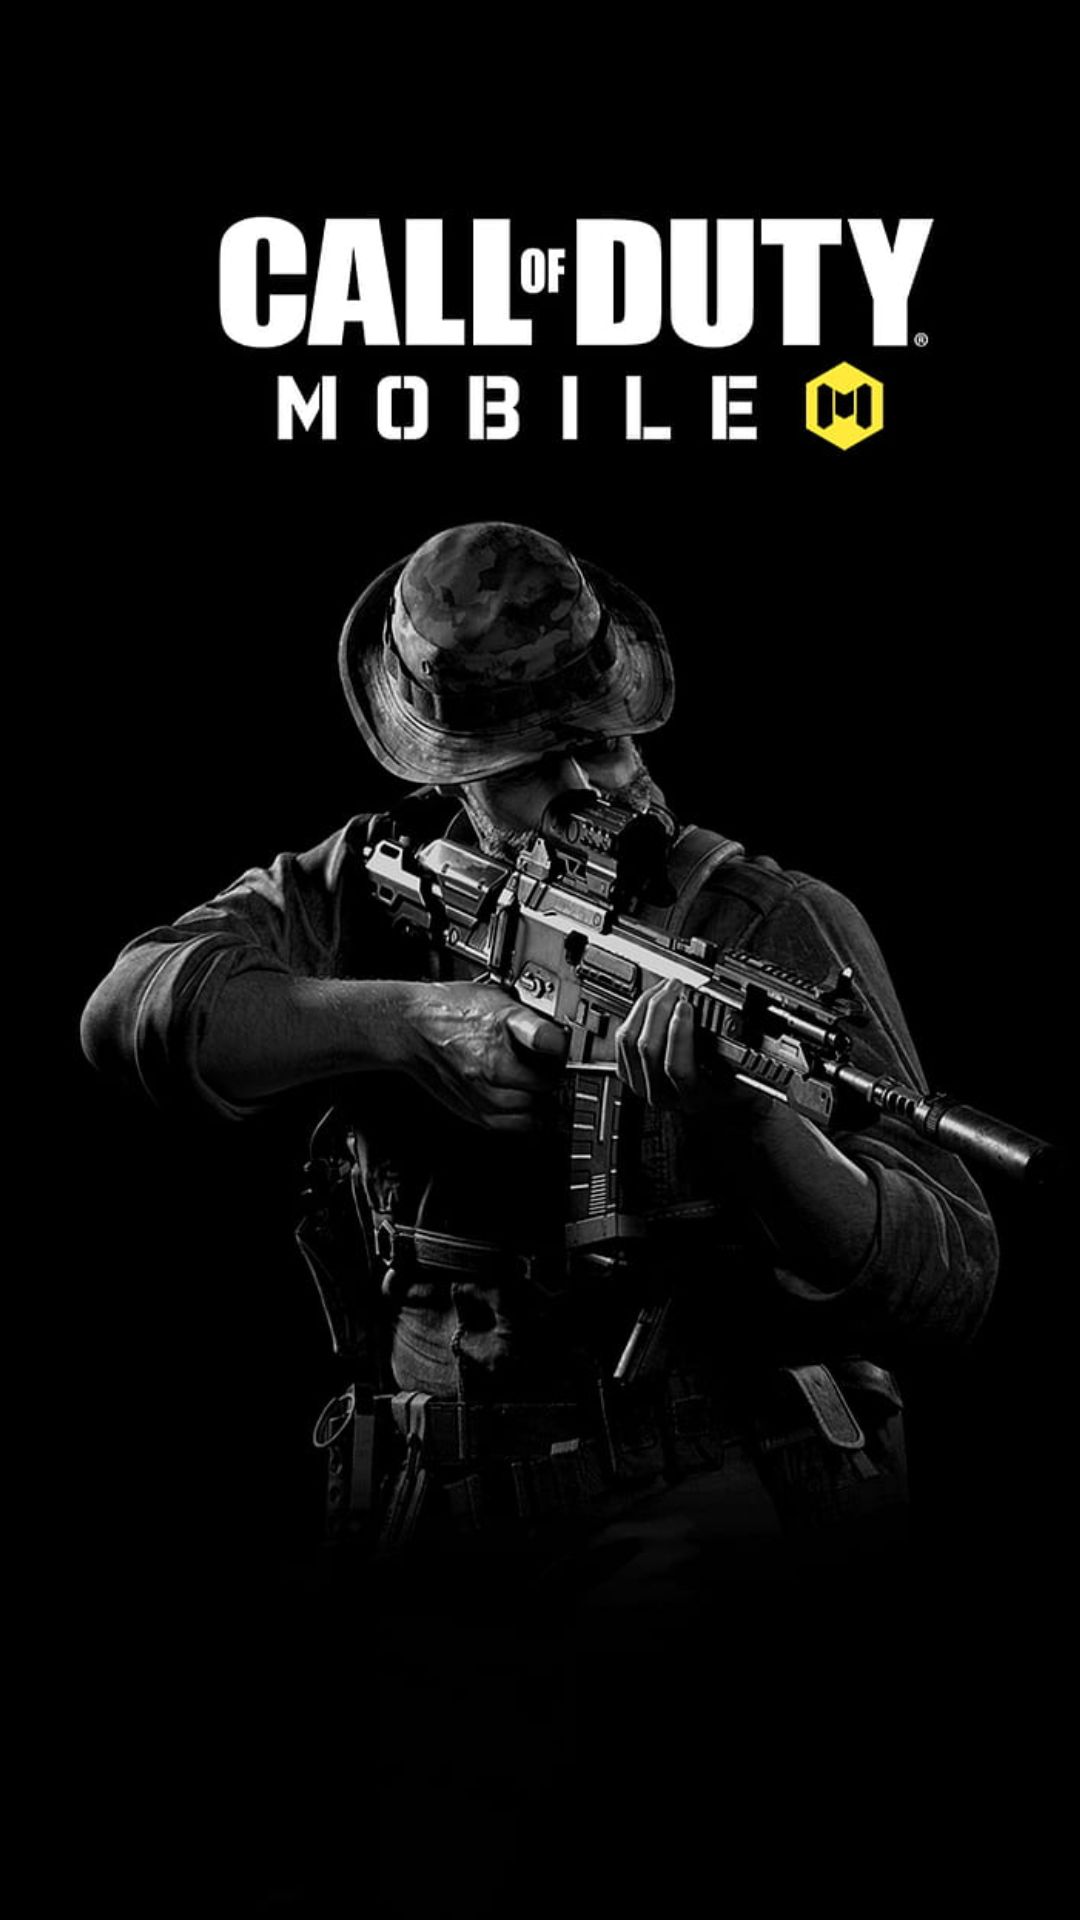 Call of Duty Mobile Wallpapers - Top 30 Best Call of Duty Mobile Wallpapers  Download